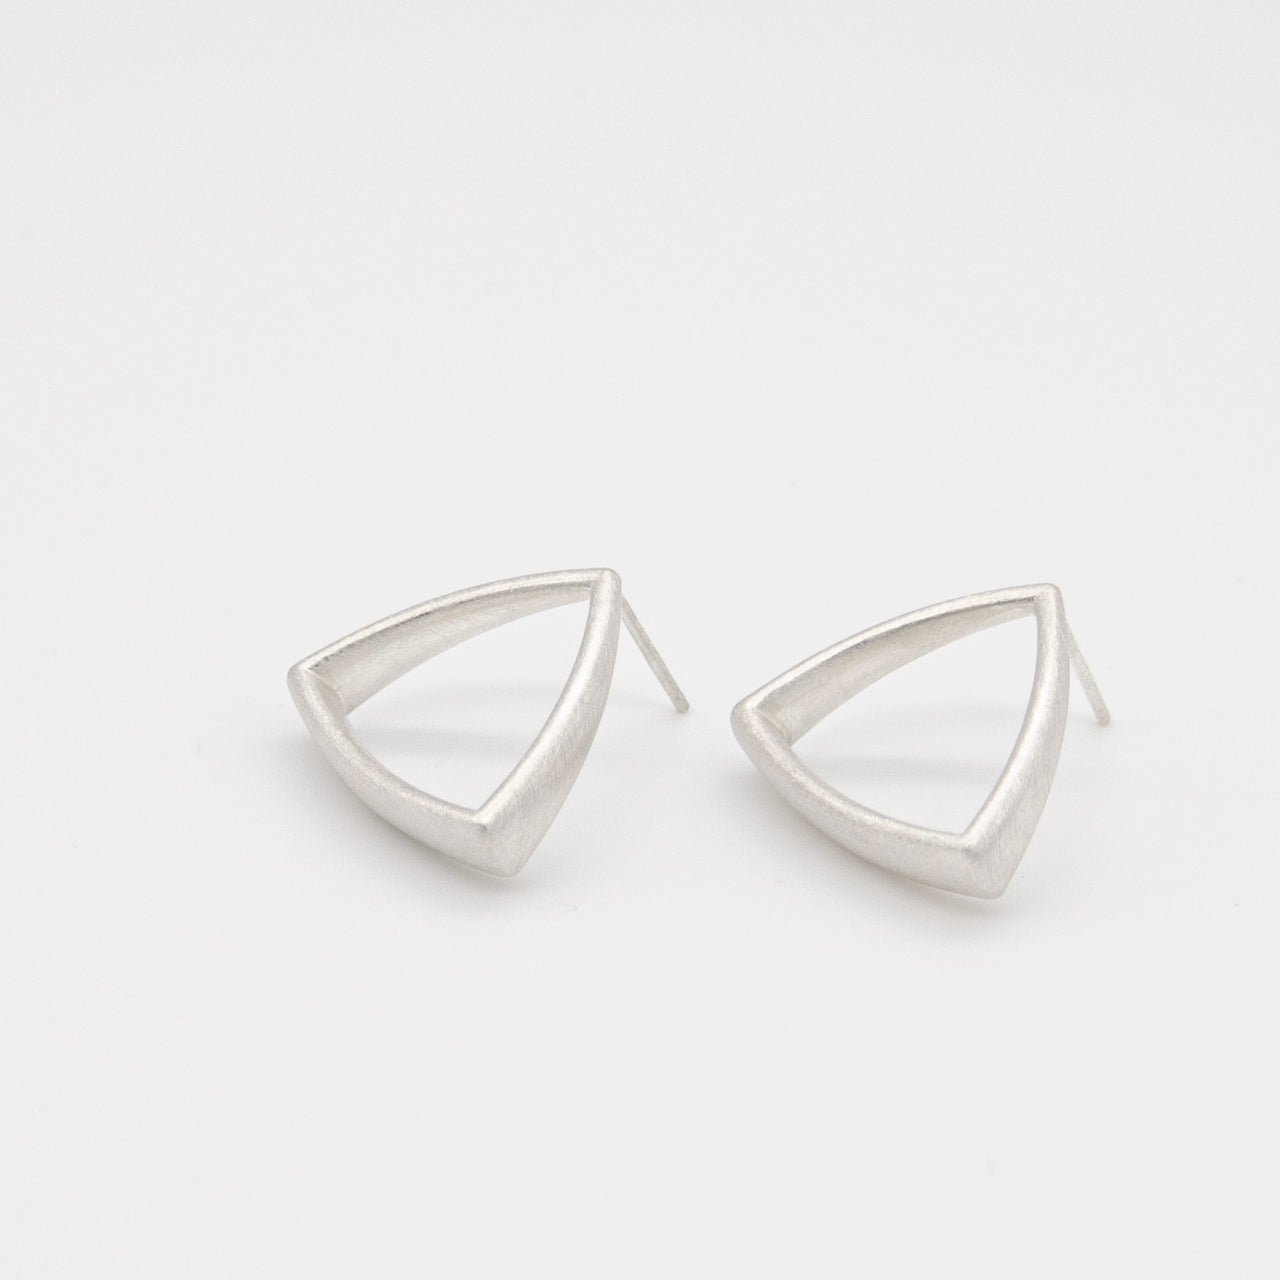 Curved Curves Triangle Earrings Silver